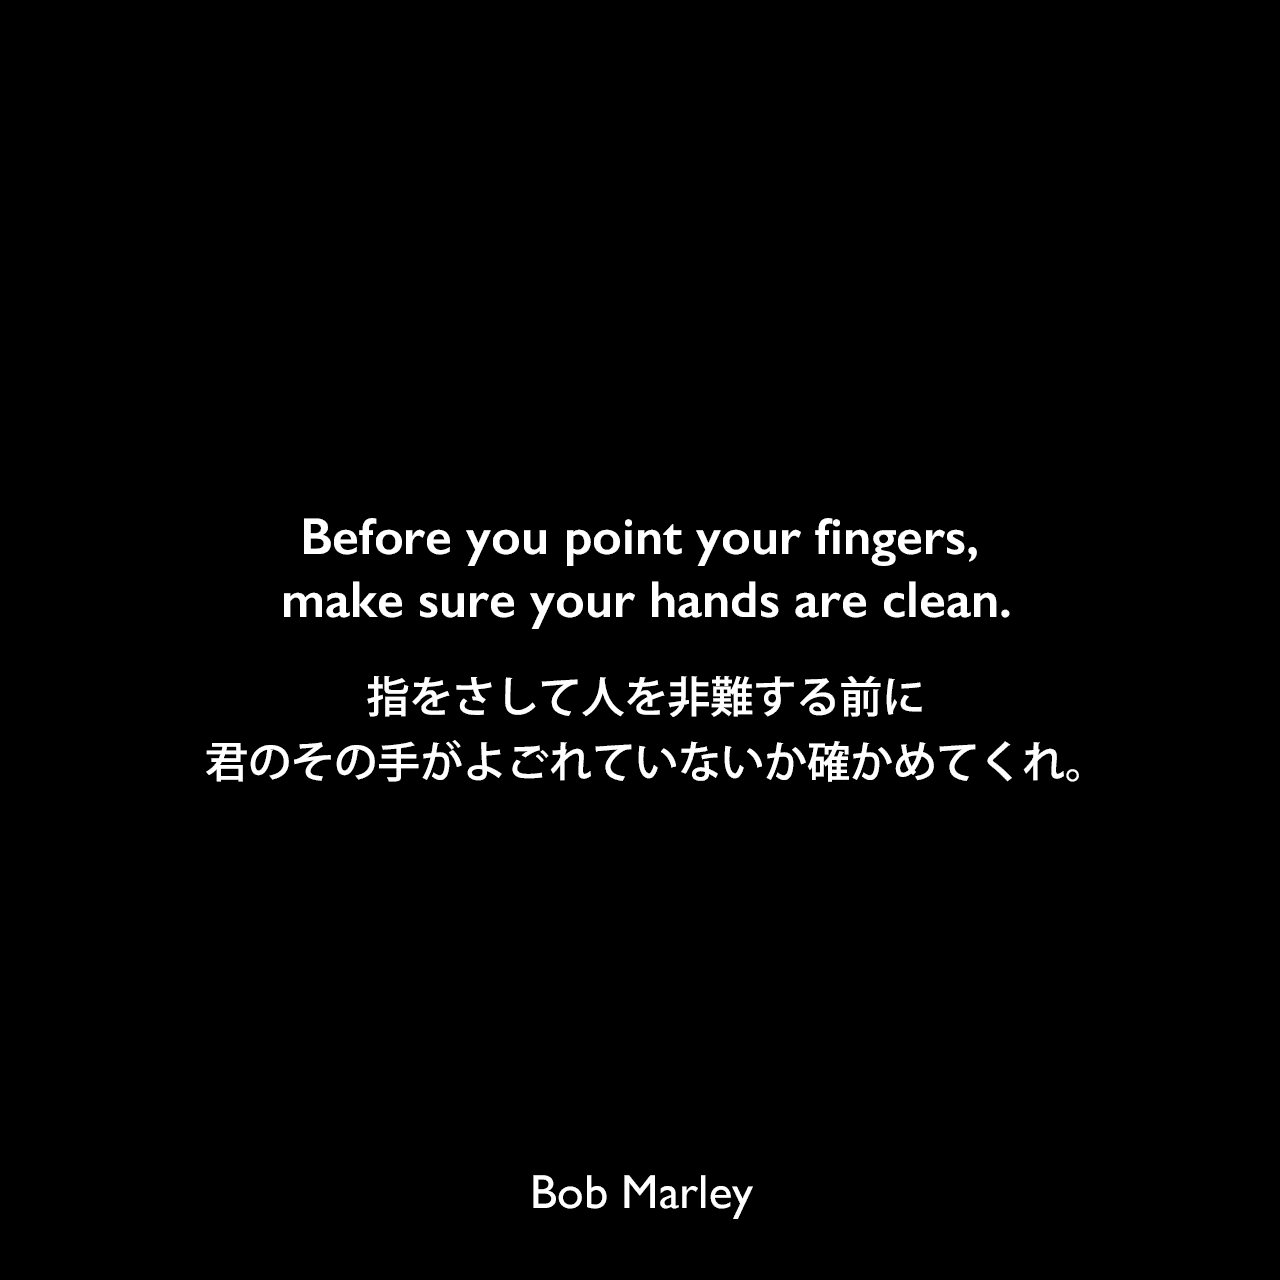 Before you point your fingers, make sure your hands are clean.指をさして人を非難する前に、君のその手がよごれていないか確かめてくれ。Bob Marley